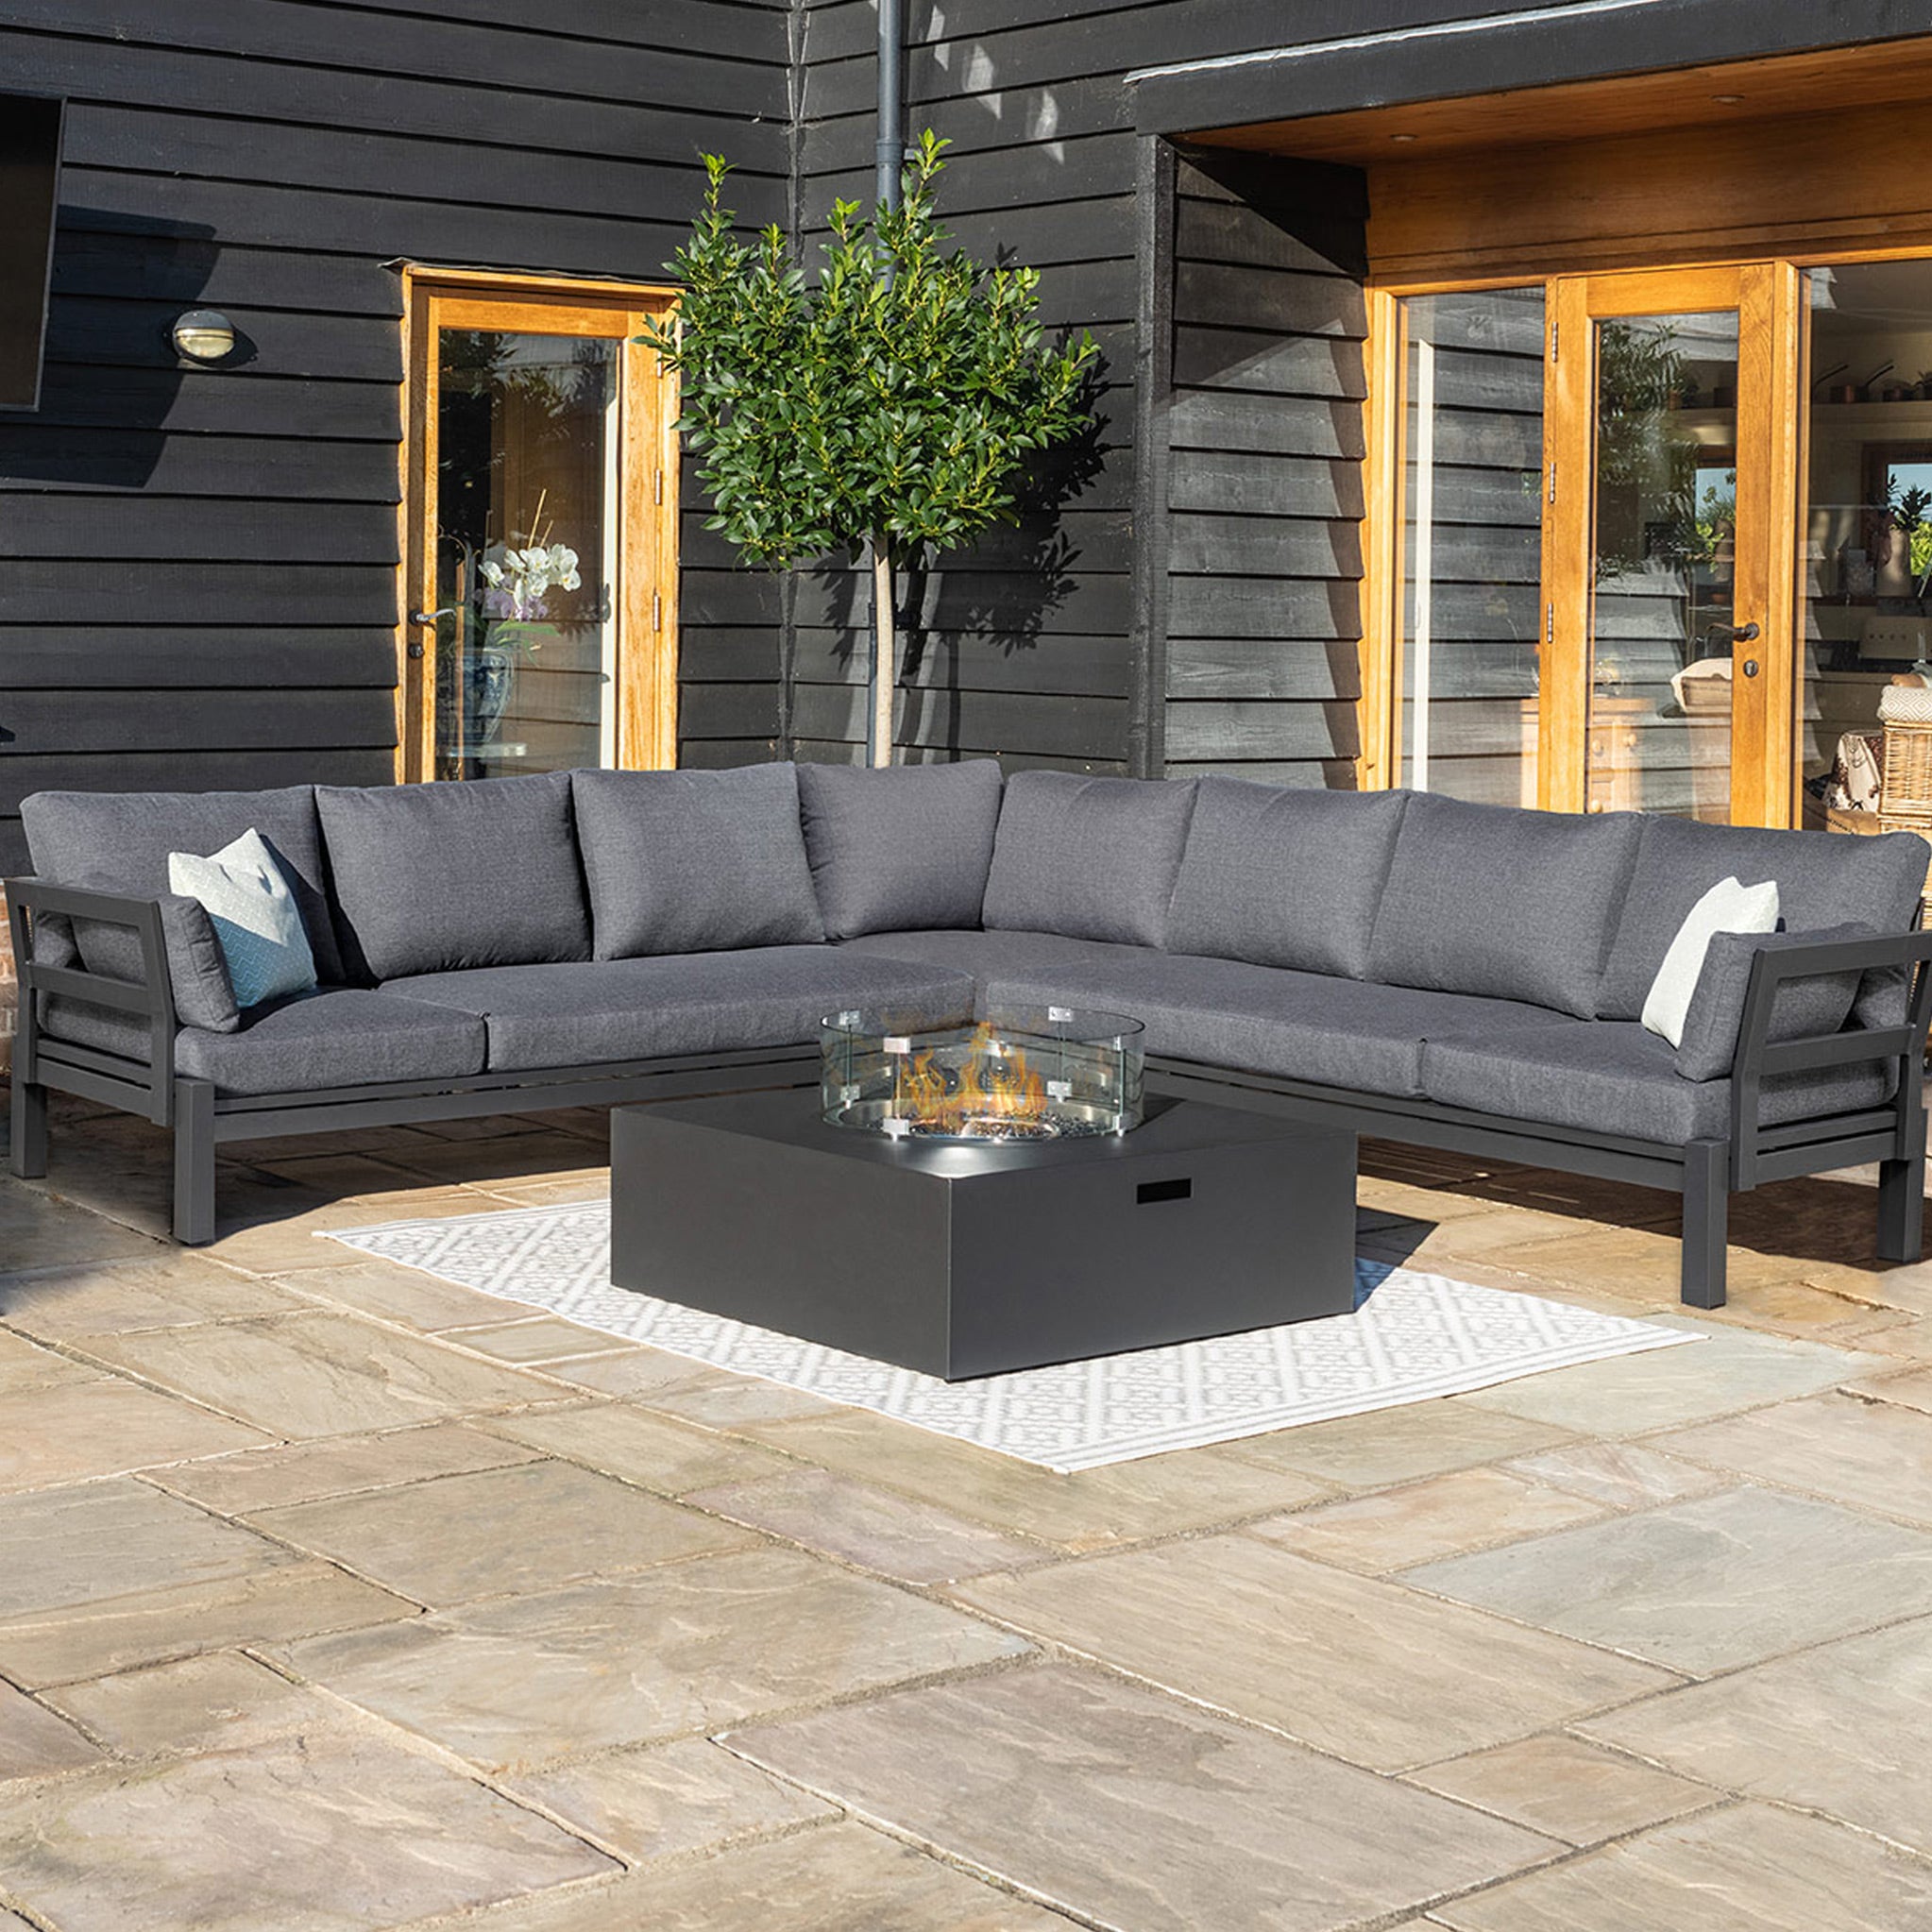 Maze Oslo Large Outdoor Corner Sofa Set With Square Gas Fire Pit Table